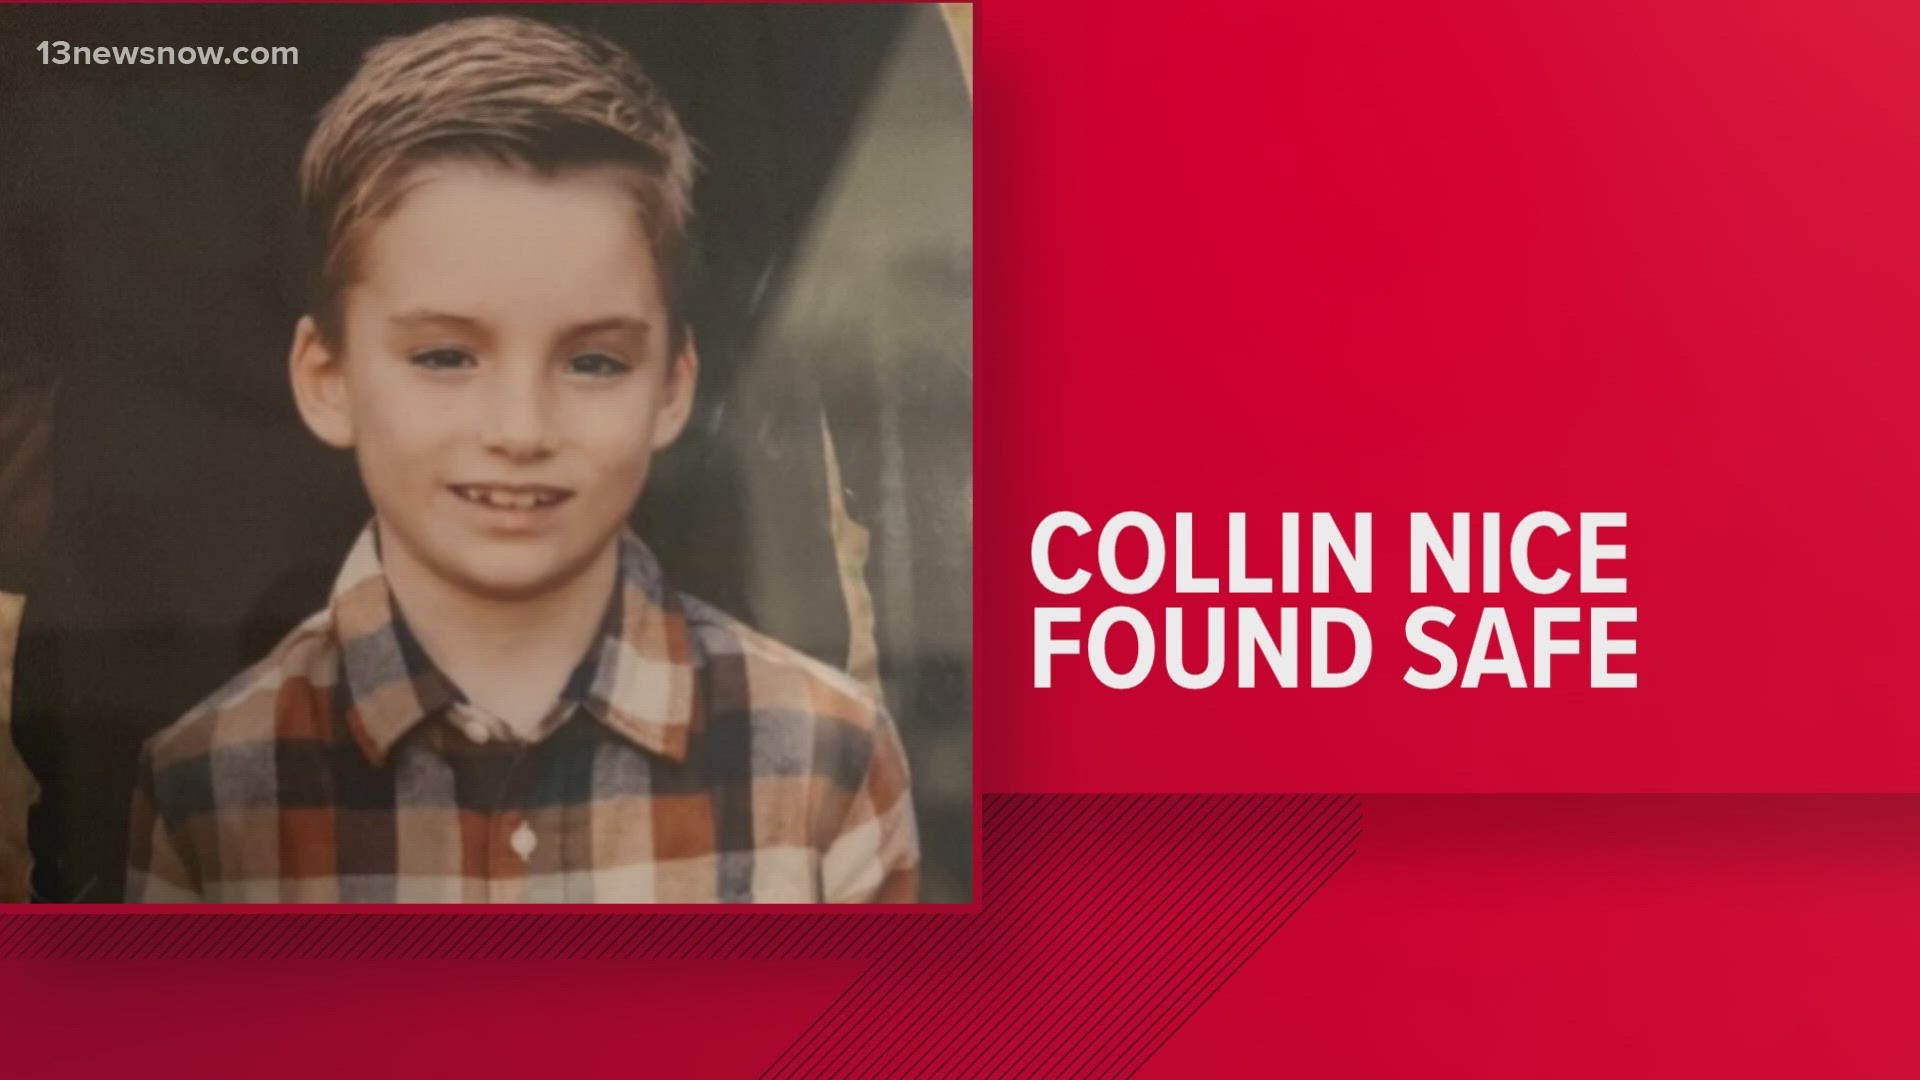 Virginia Beach police updated Thursday that a 9-year-old missing from Virginia Beach has been found alive.